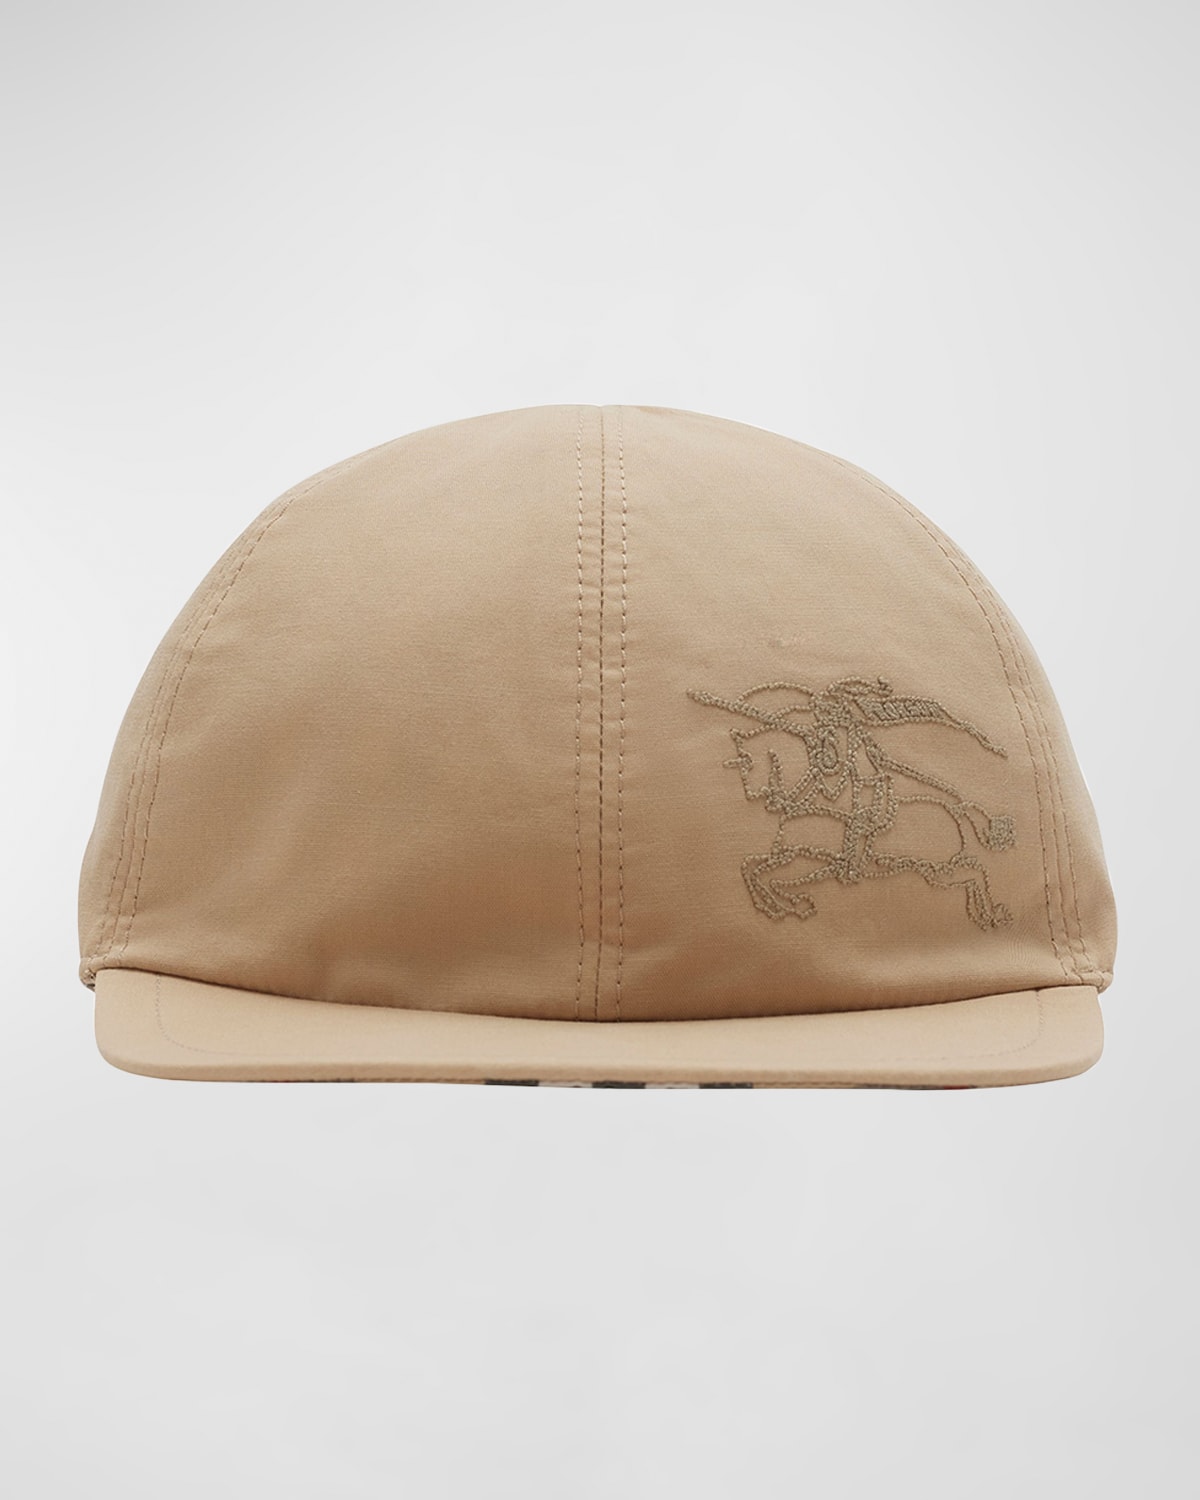 Burberry Kid's Embroidered Equestrian Knight Design Baseball Cap In Sand Check